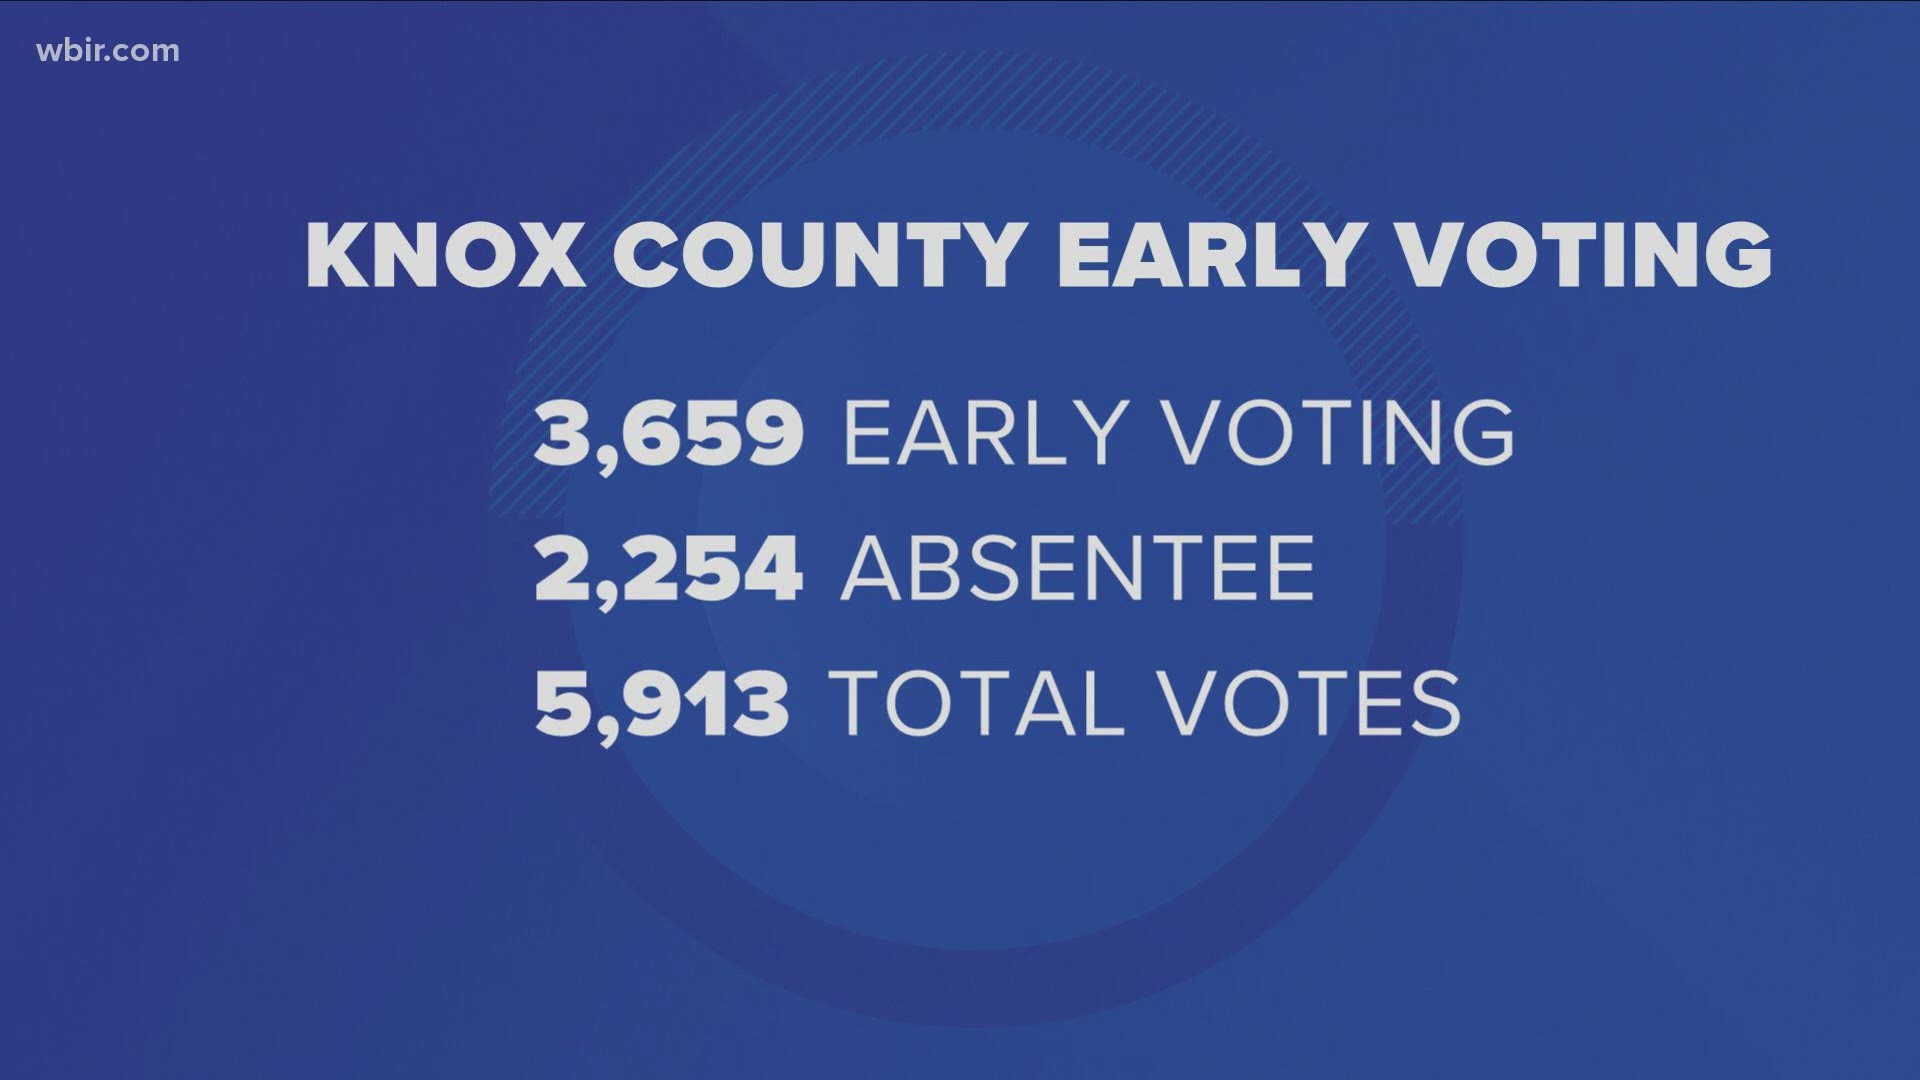 More than 5,900 people have already cast a ballot in Tennessee's primary election.